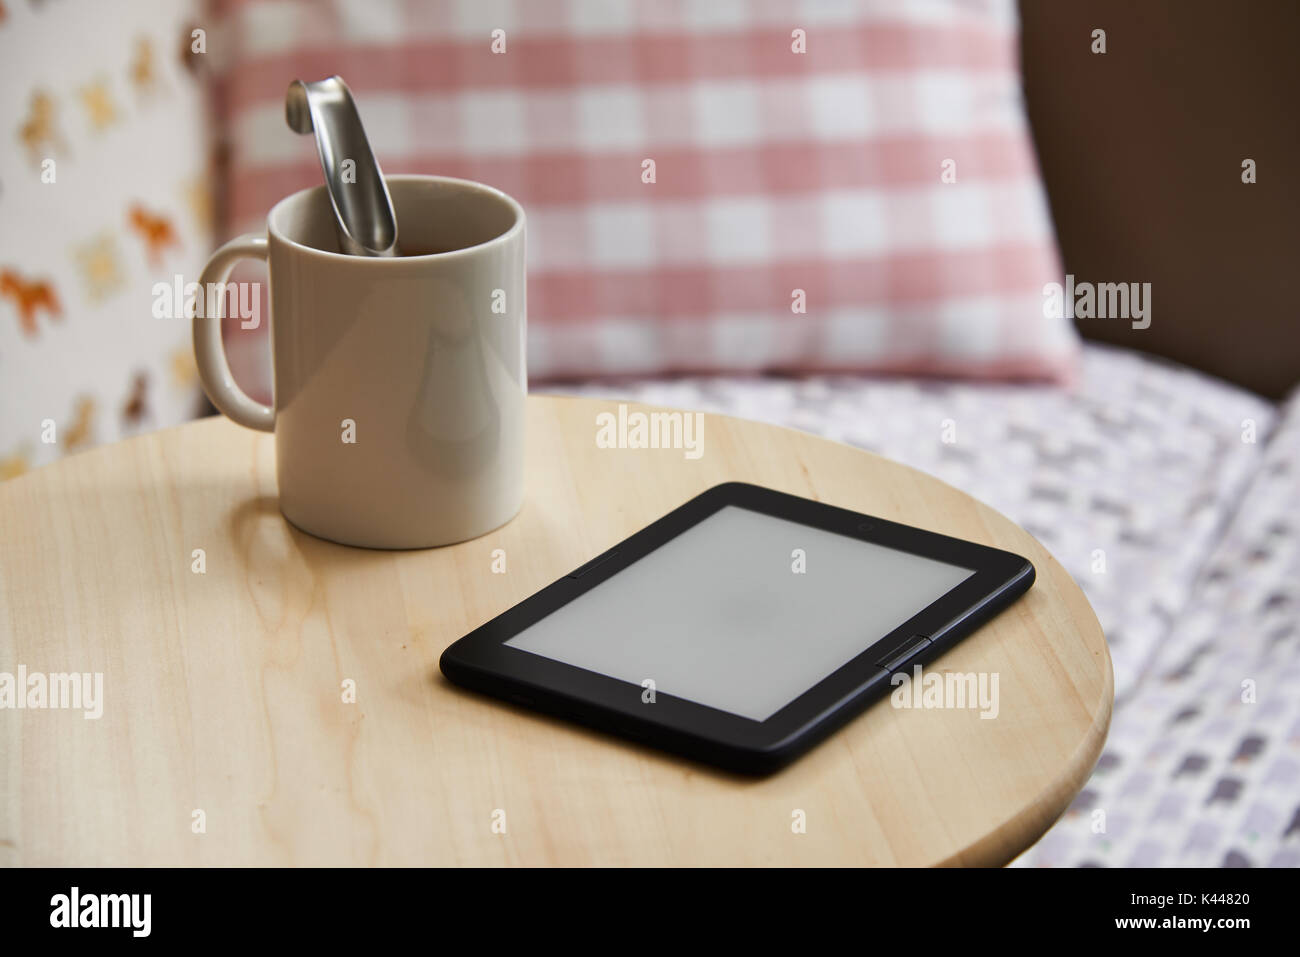 ebook device with blank screen on a table. The e-book device is a dedicated device for reading e-books. Stock Photo